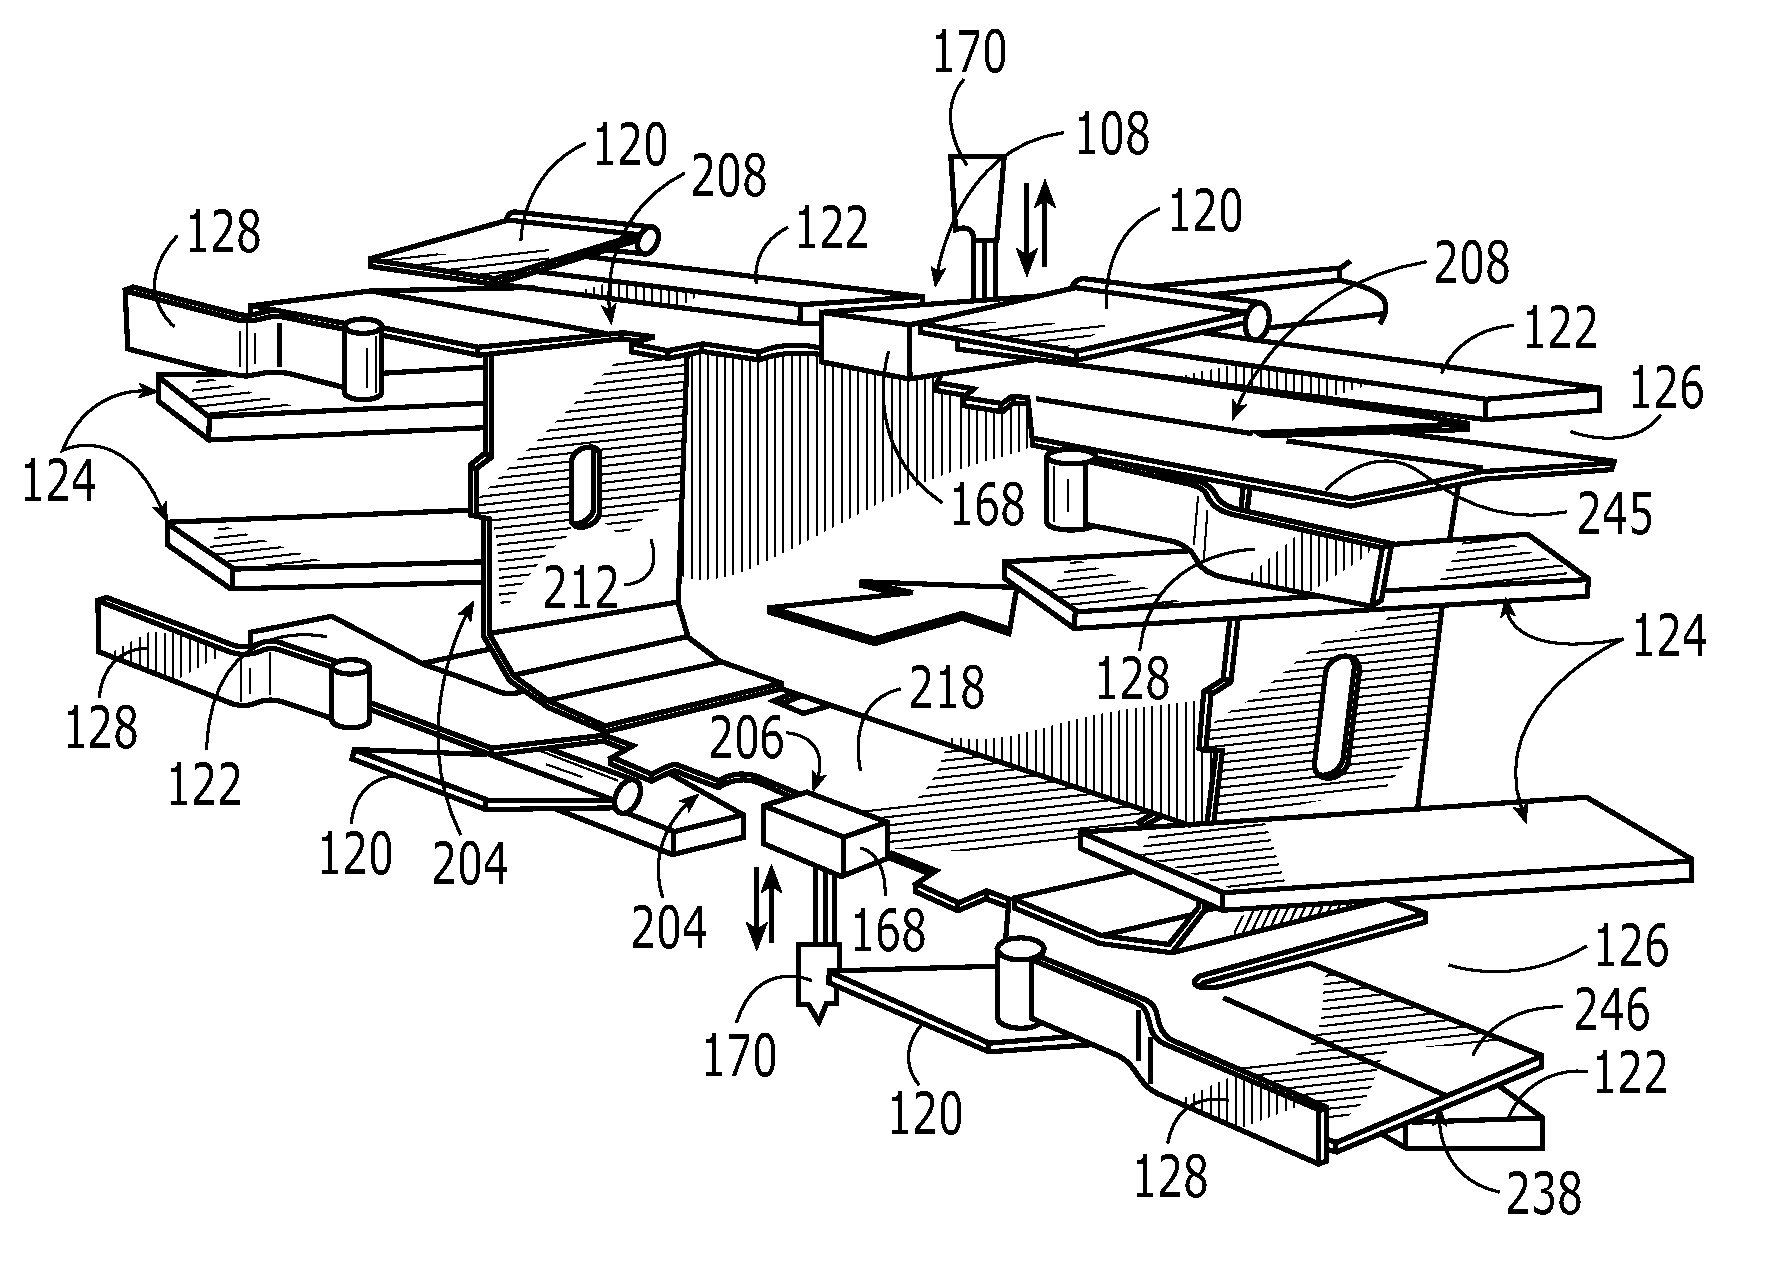 Apparatus and method for forming a container having an enhanced corner support structure